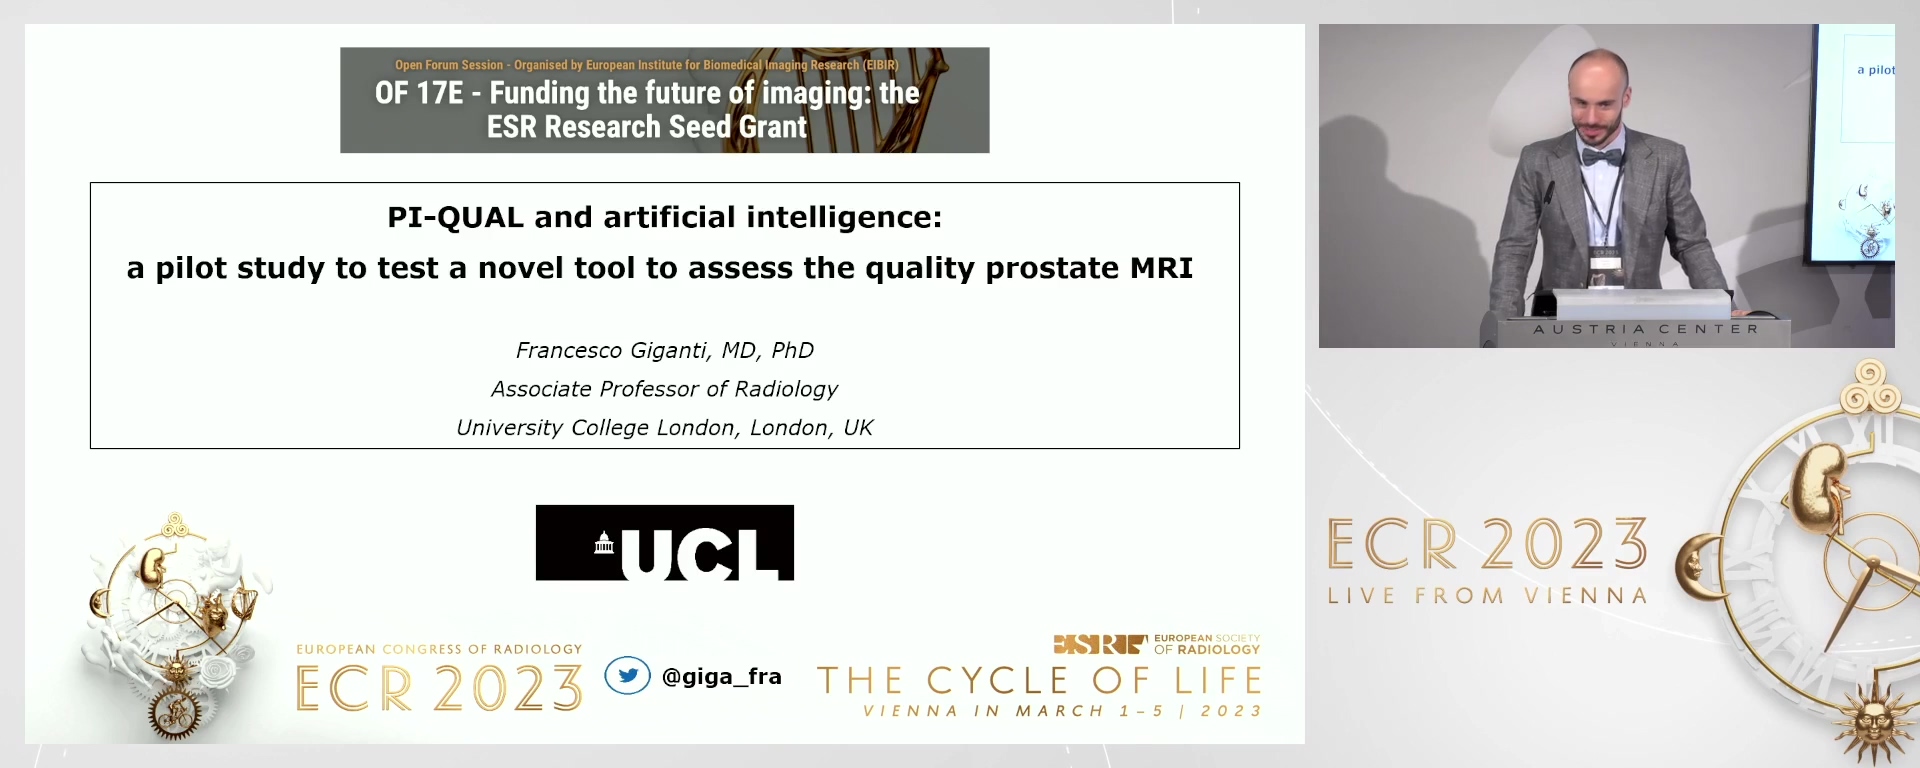 PI-QUAL and artificial intelligence: a pilot study to test a novel tool to assess the quality of multiparametric MRI of the prostate - Francesco  Giganti, London / UK